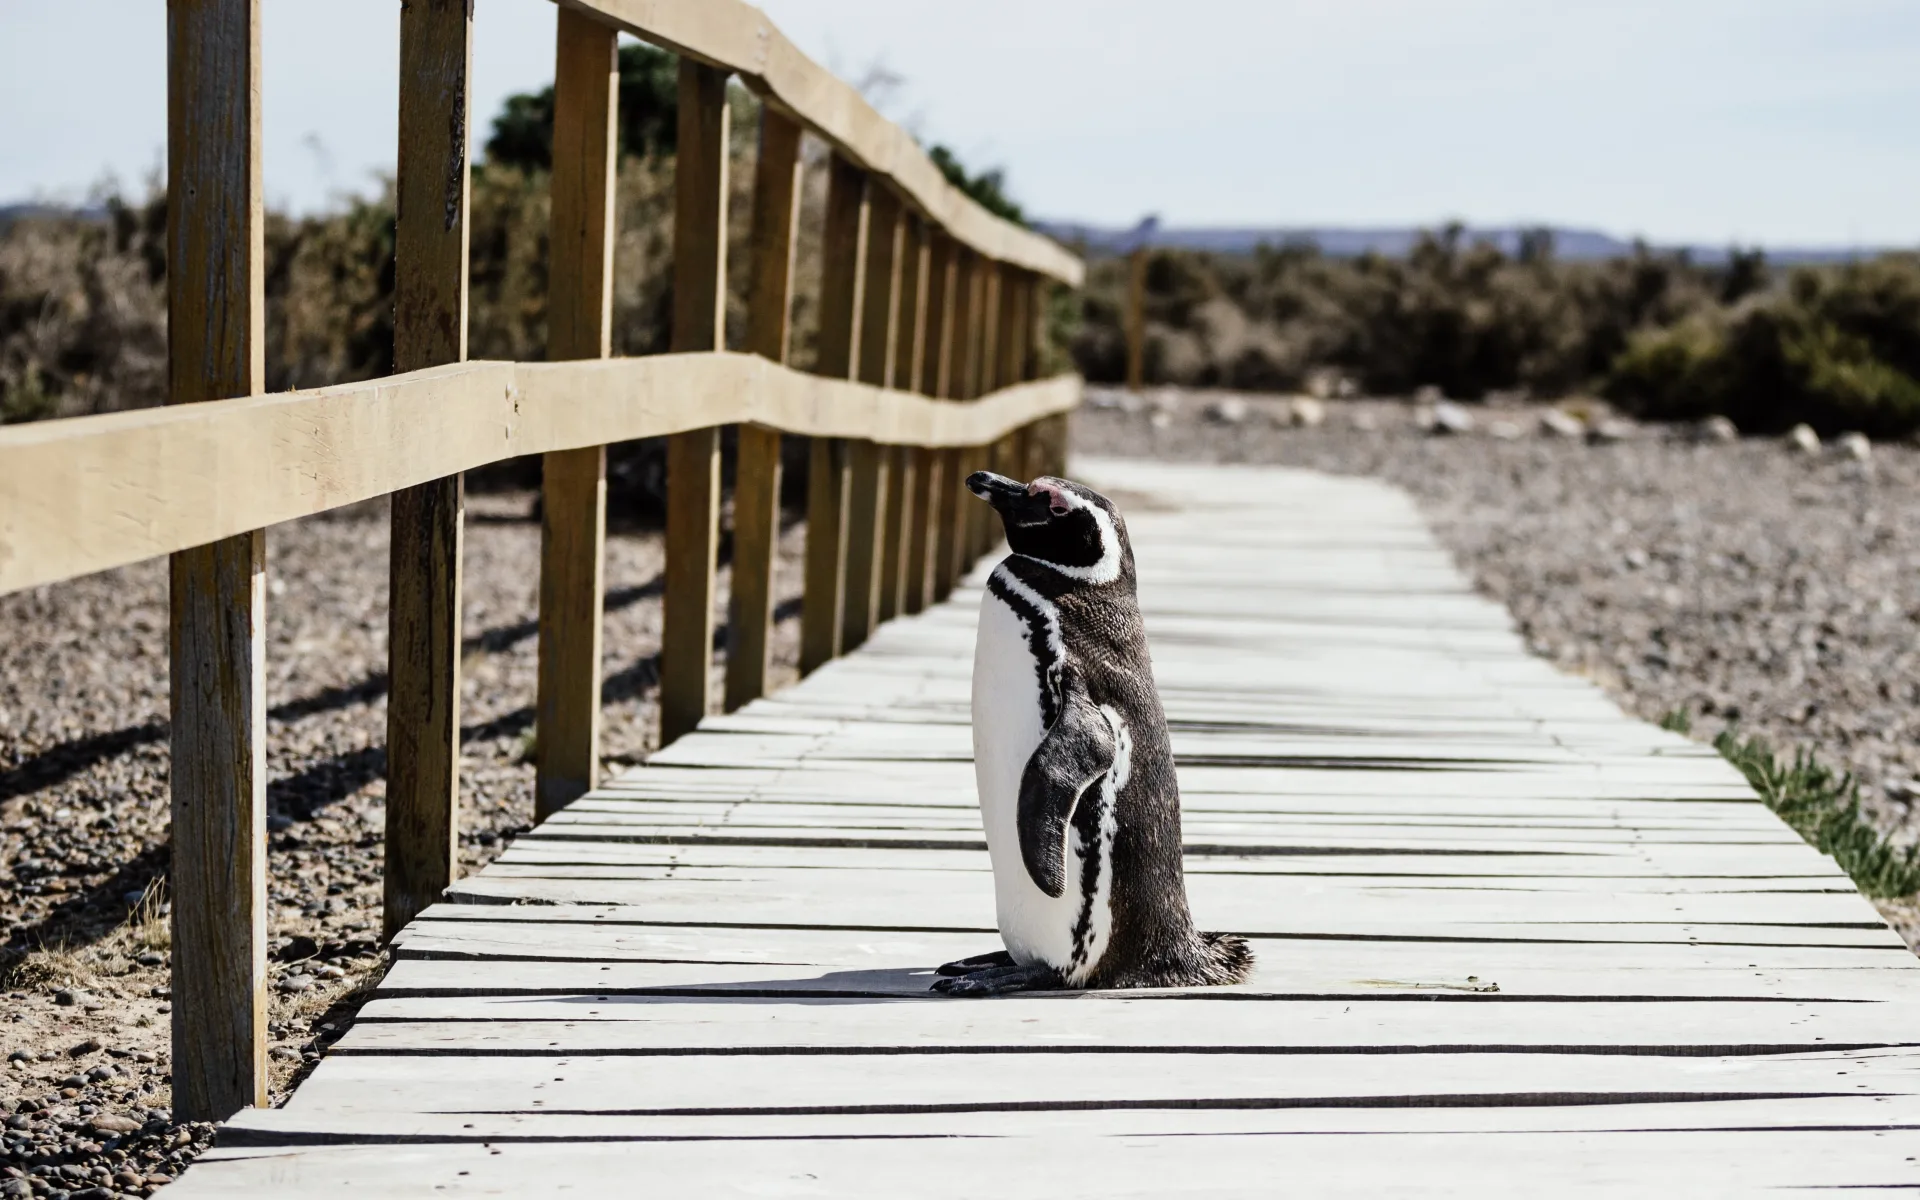 A penguin is standing on a wooden walkway.